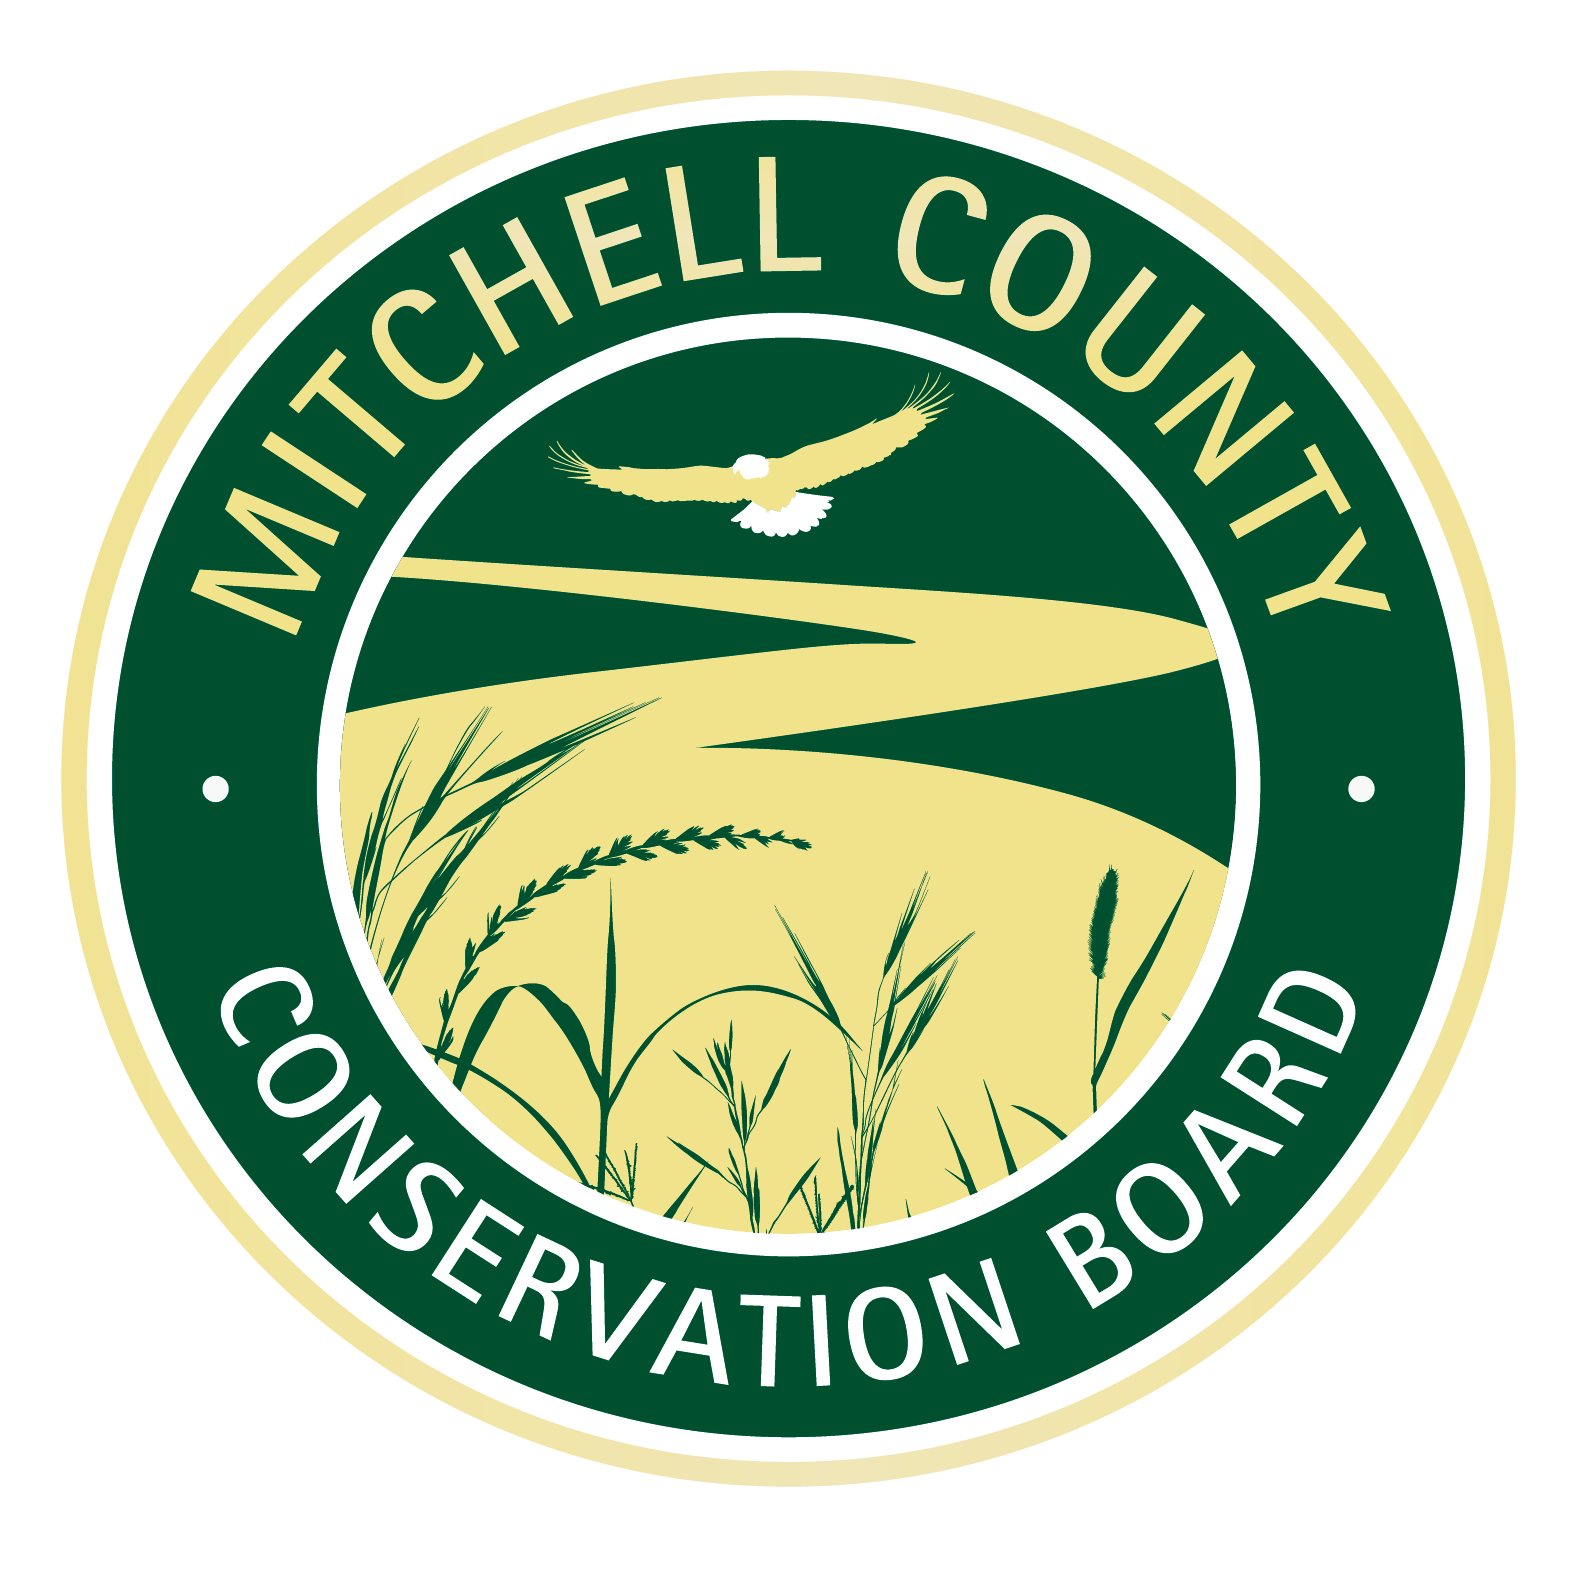 Mitchell County Conservation Board